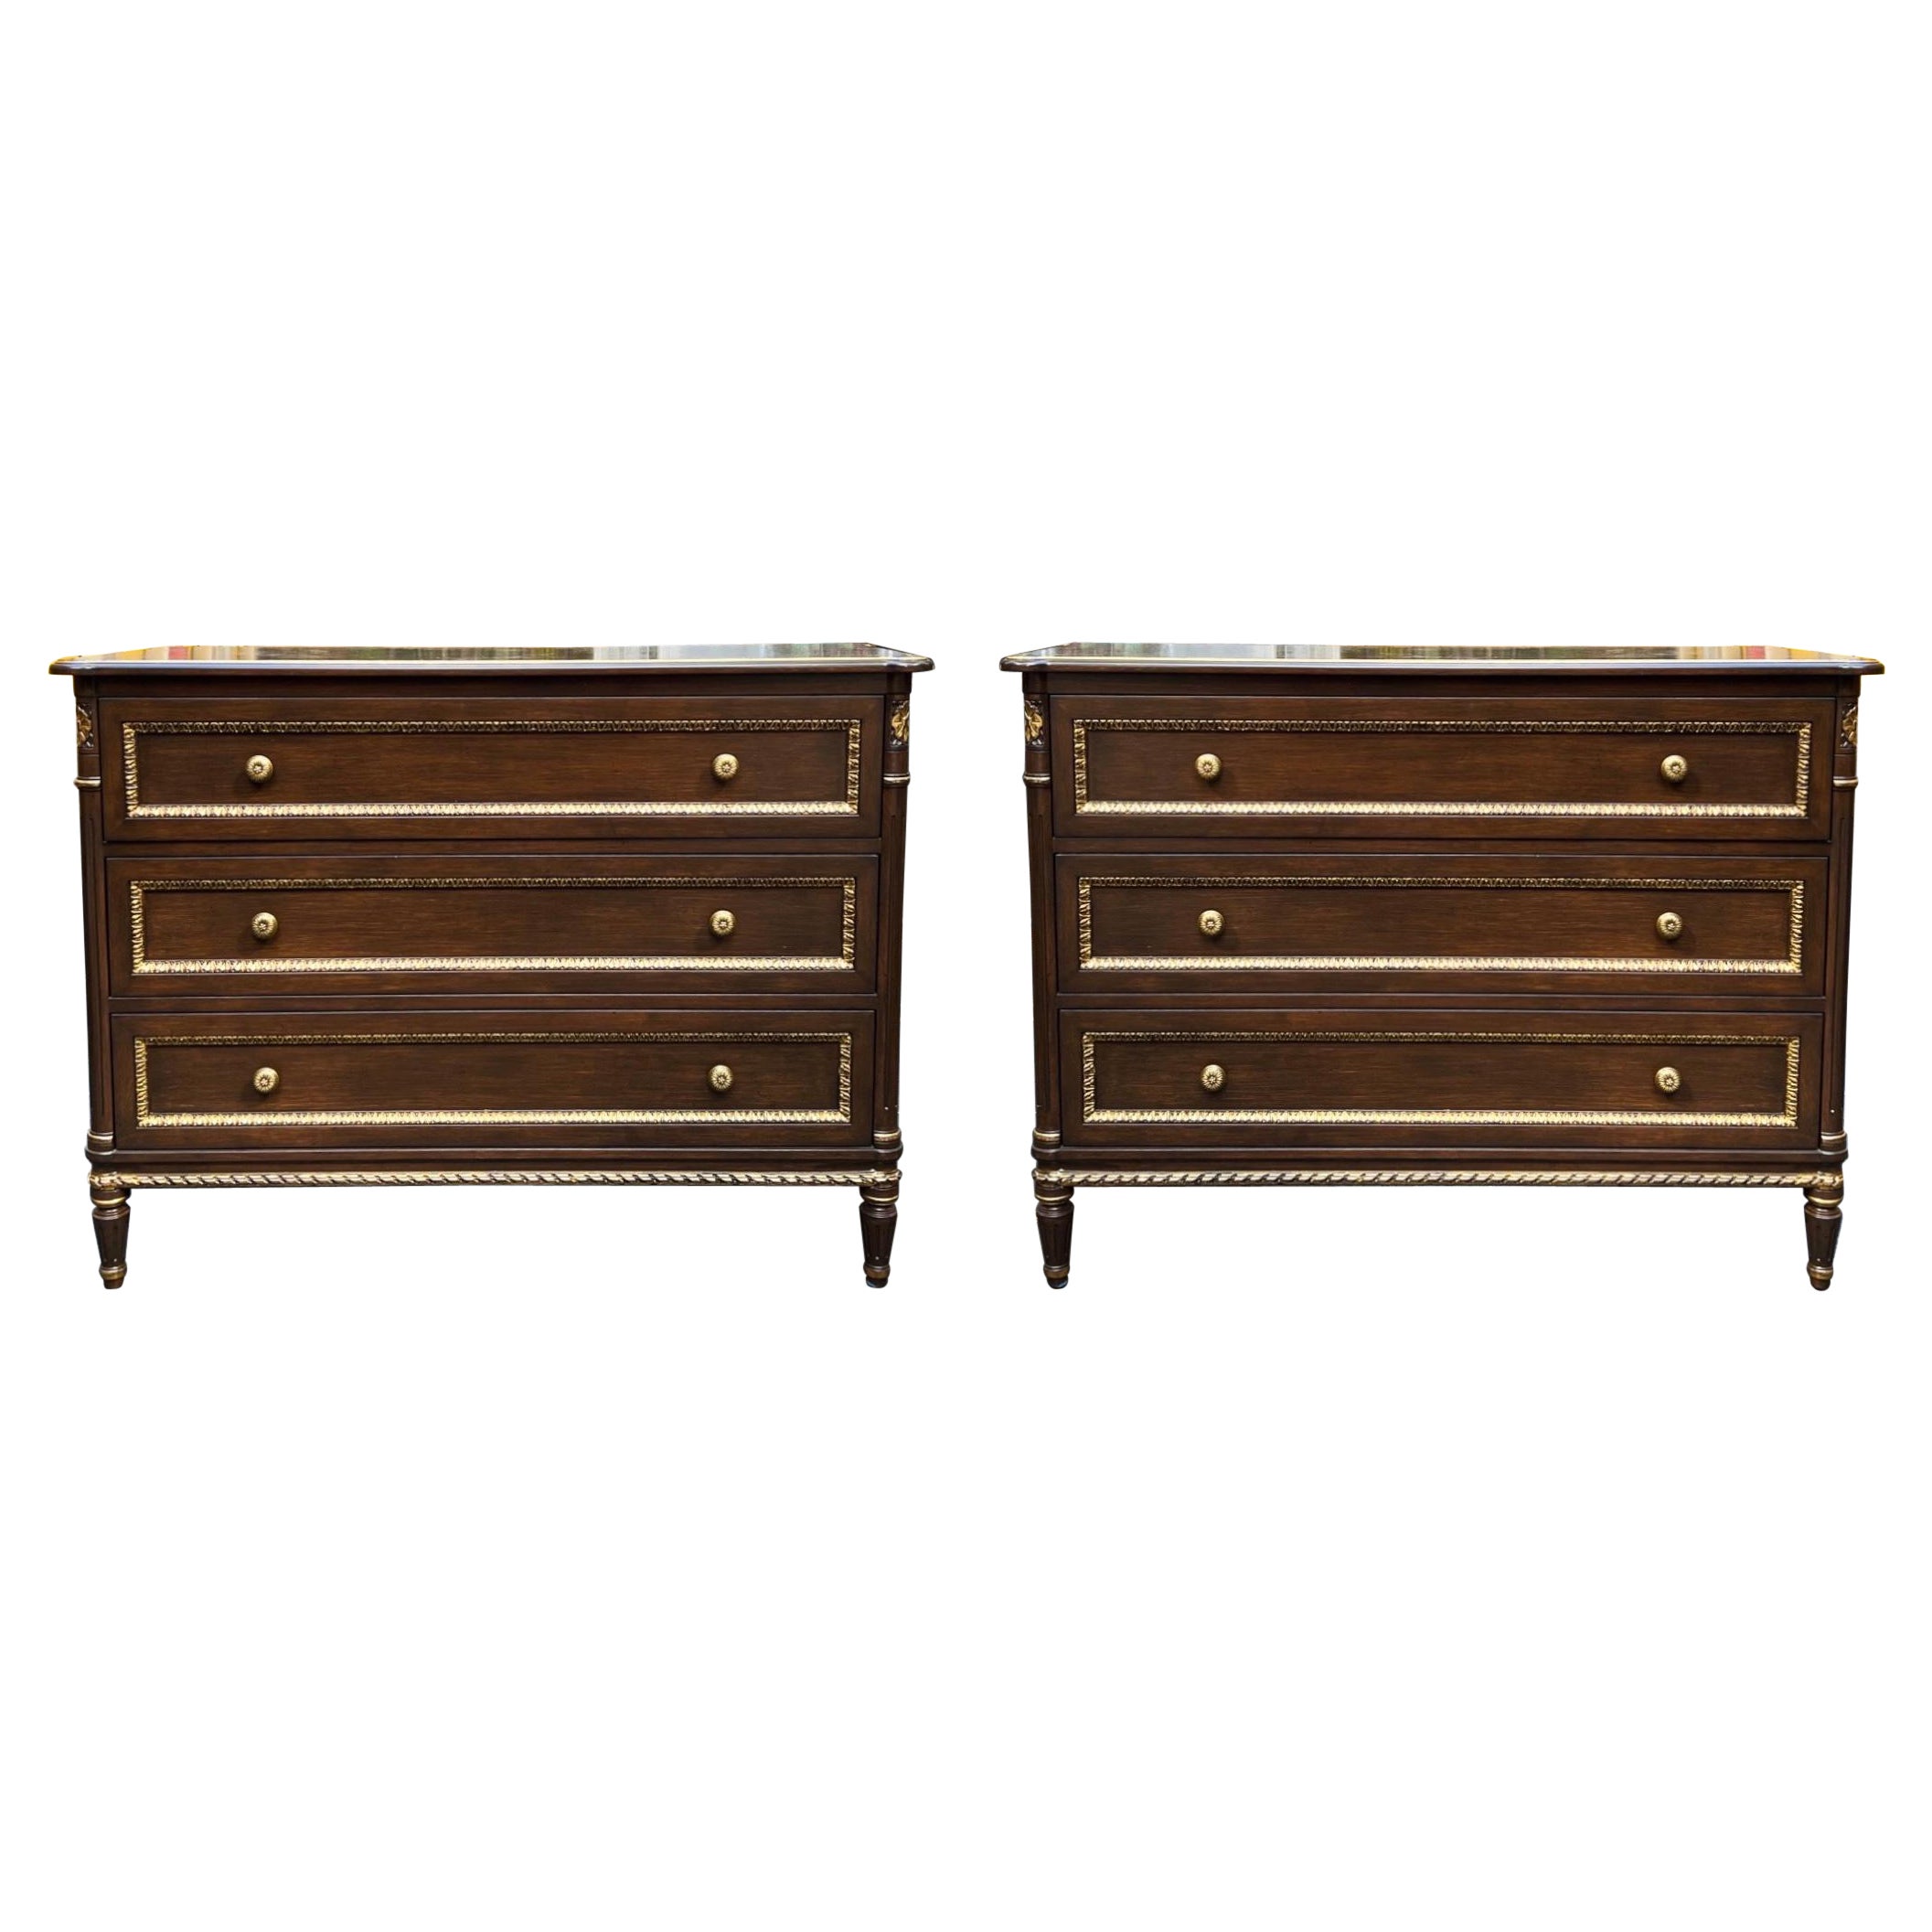 20th-C. French Louis XVI Style Cherry with Gilt Accents Chests / Commodes, Pair